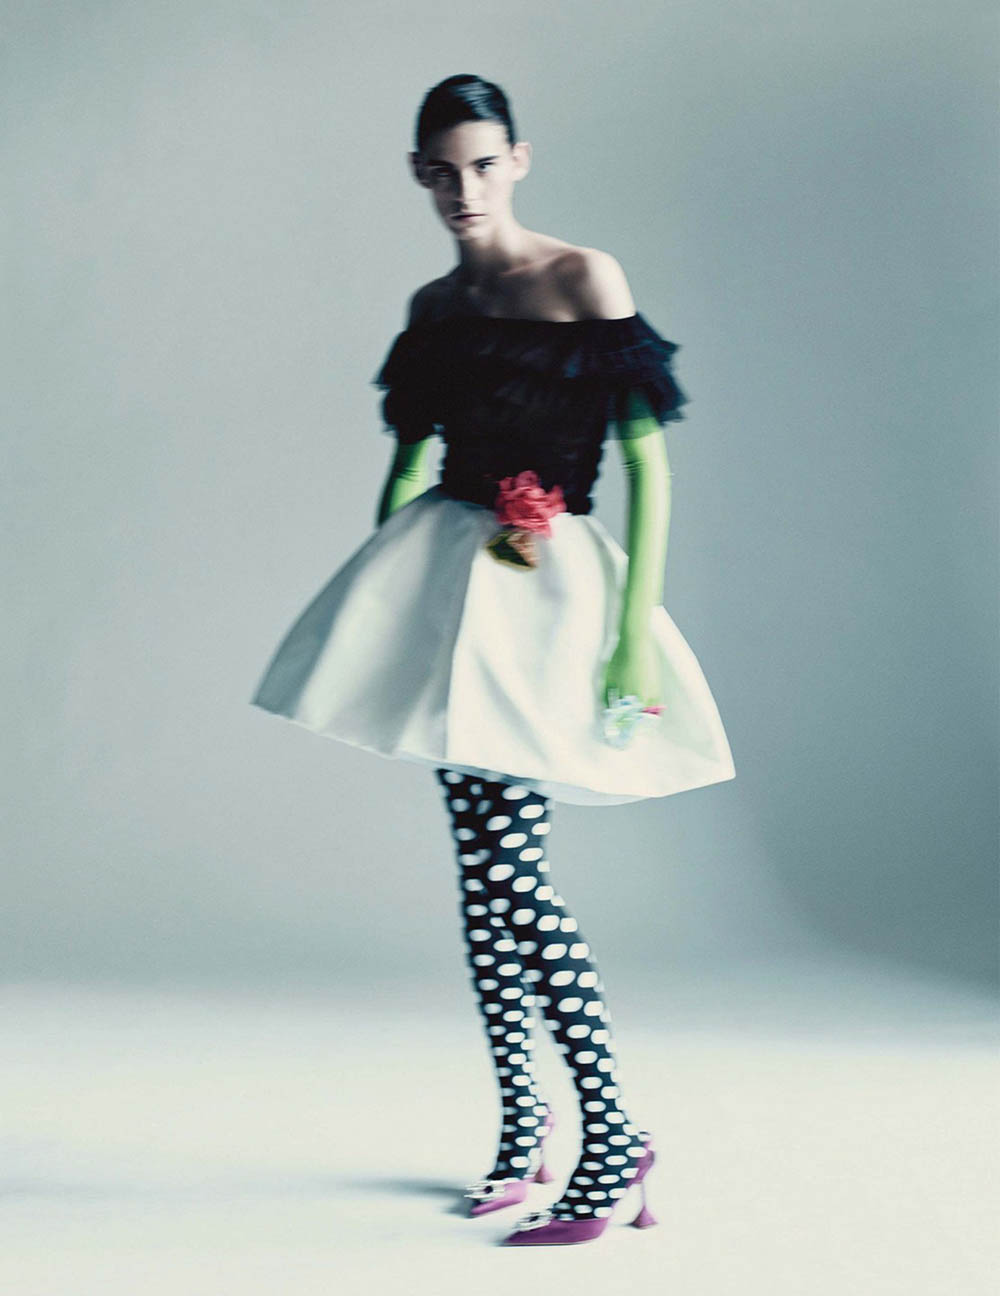 ''A French Woman'' by Paolo Roversi for Vogue Paris March 2020